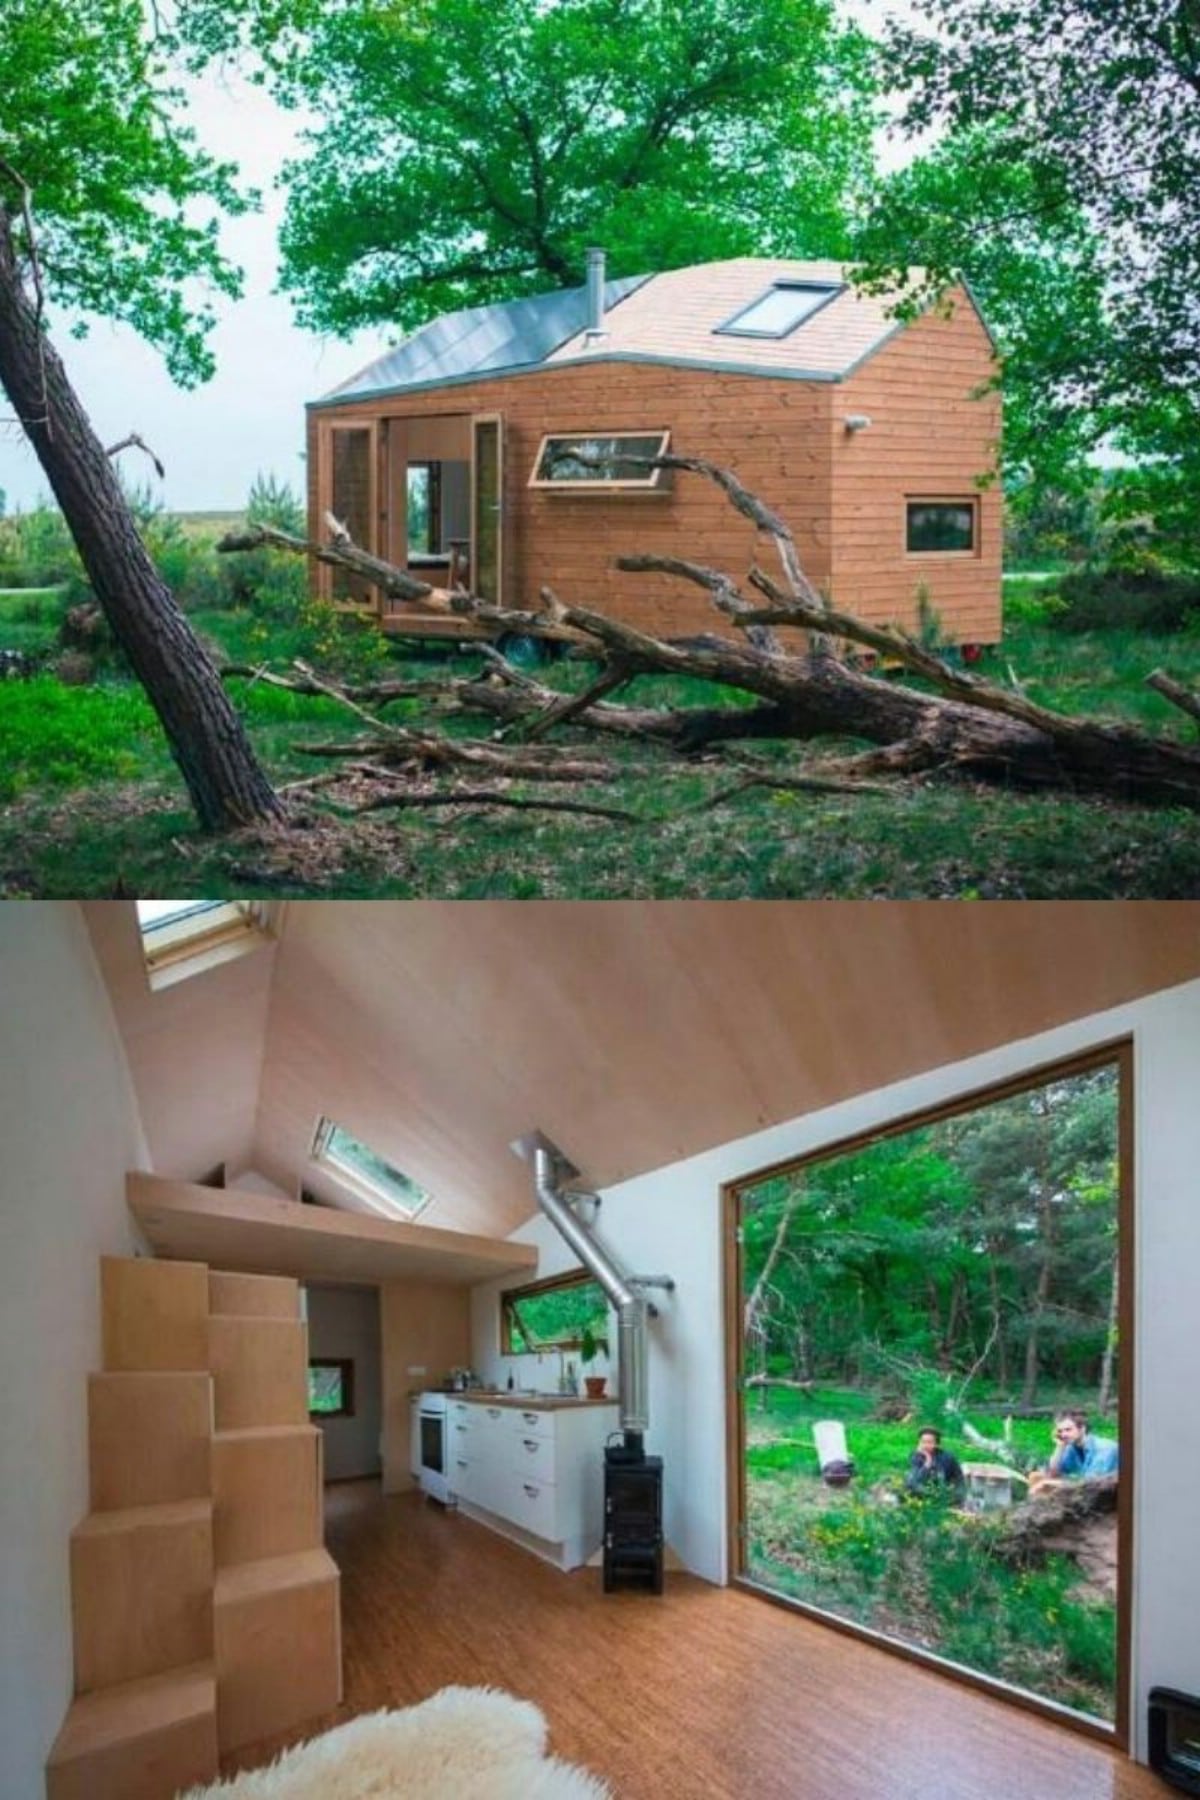 The First Legal Tiny House in the Netherlands